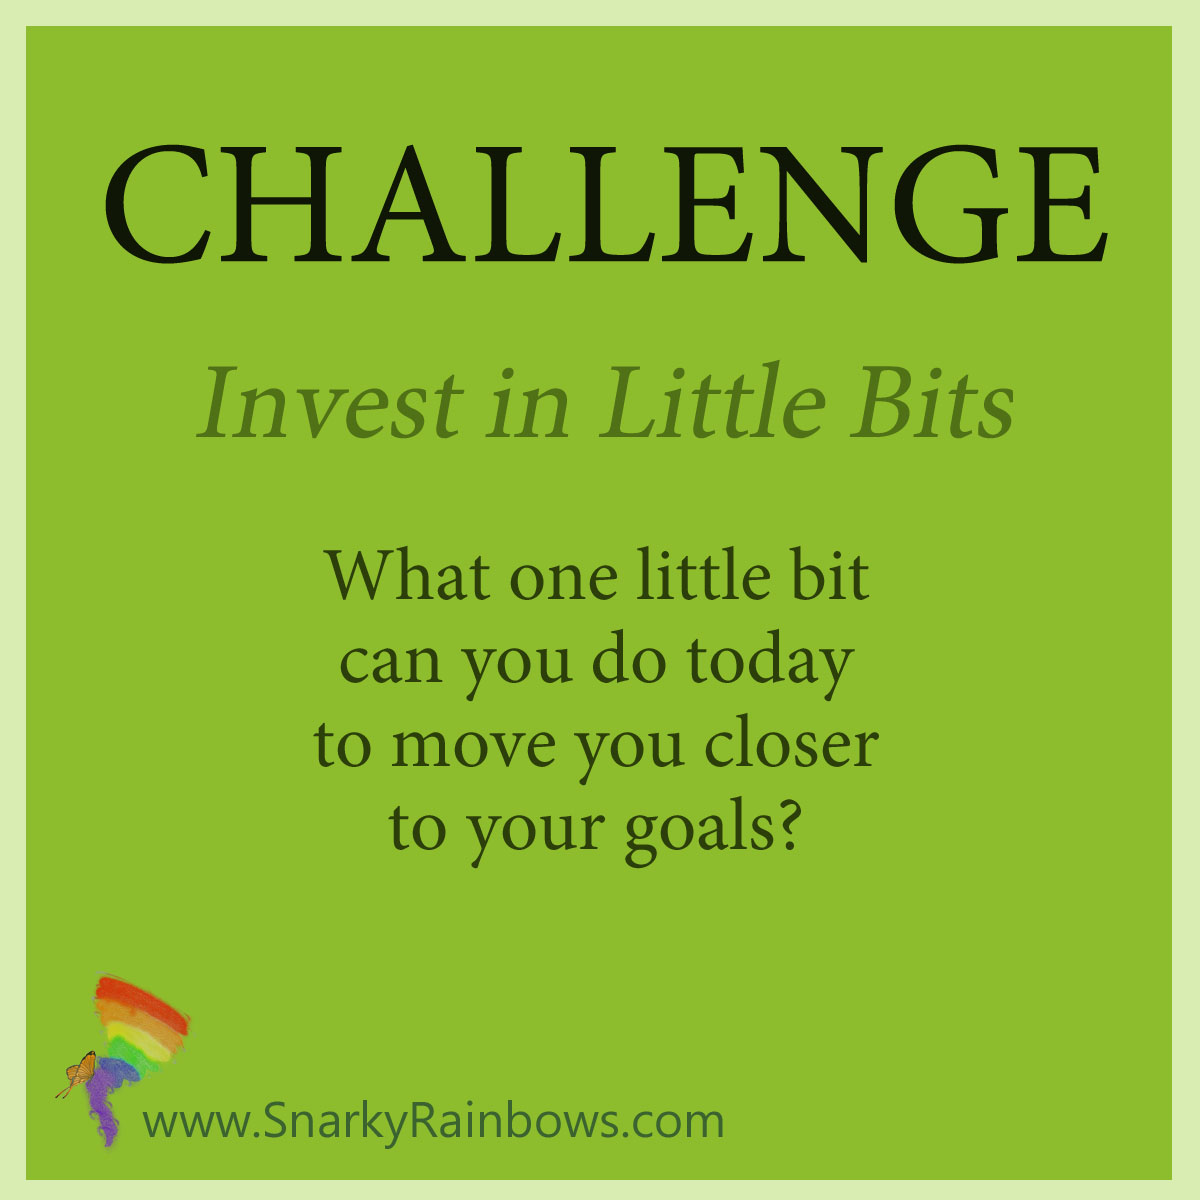 Challenge for Oct 12 - invest in little bits